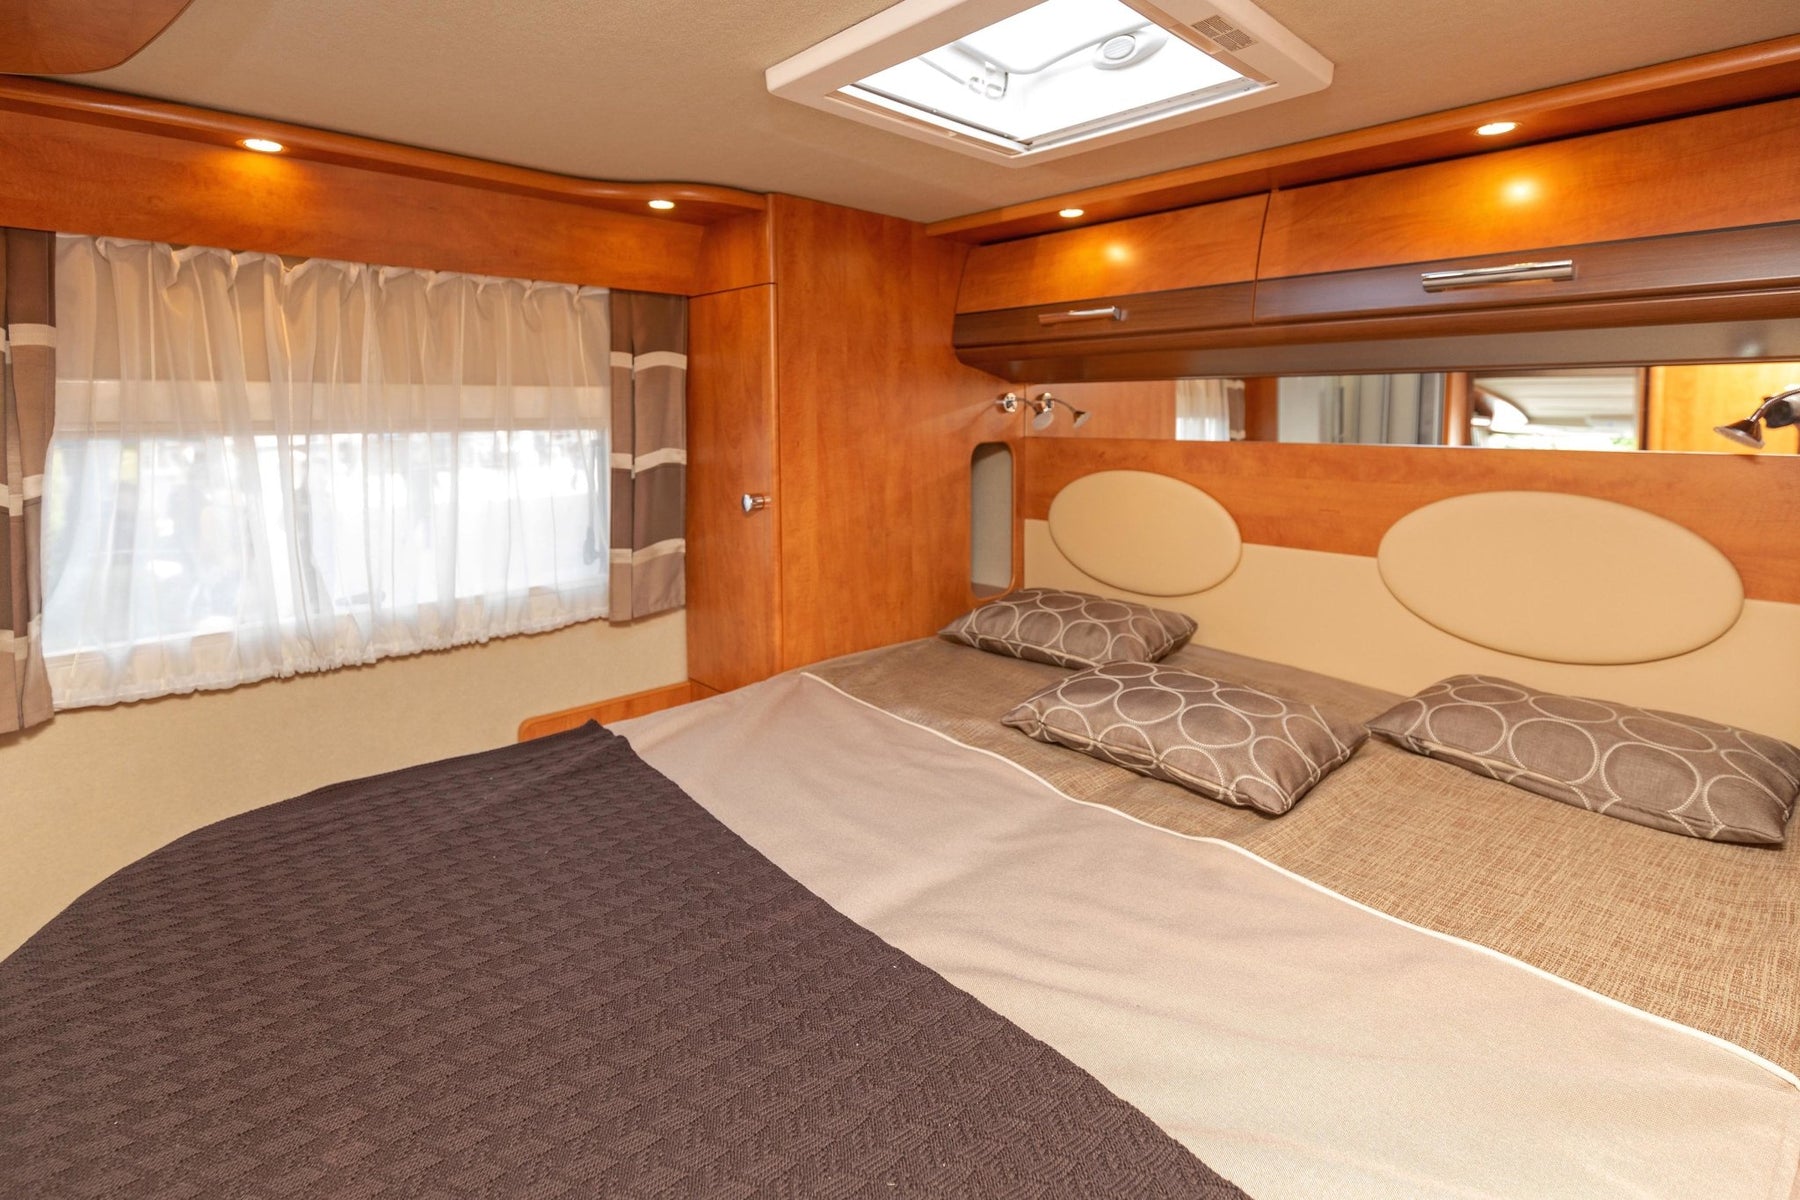 5 Facts You Didn't Know About Memory Foam Mattress for RV's